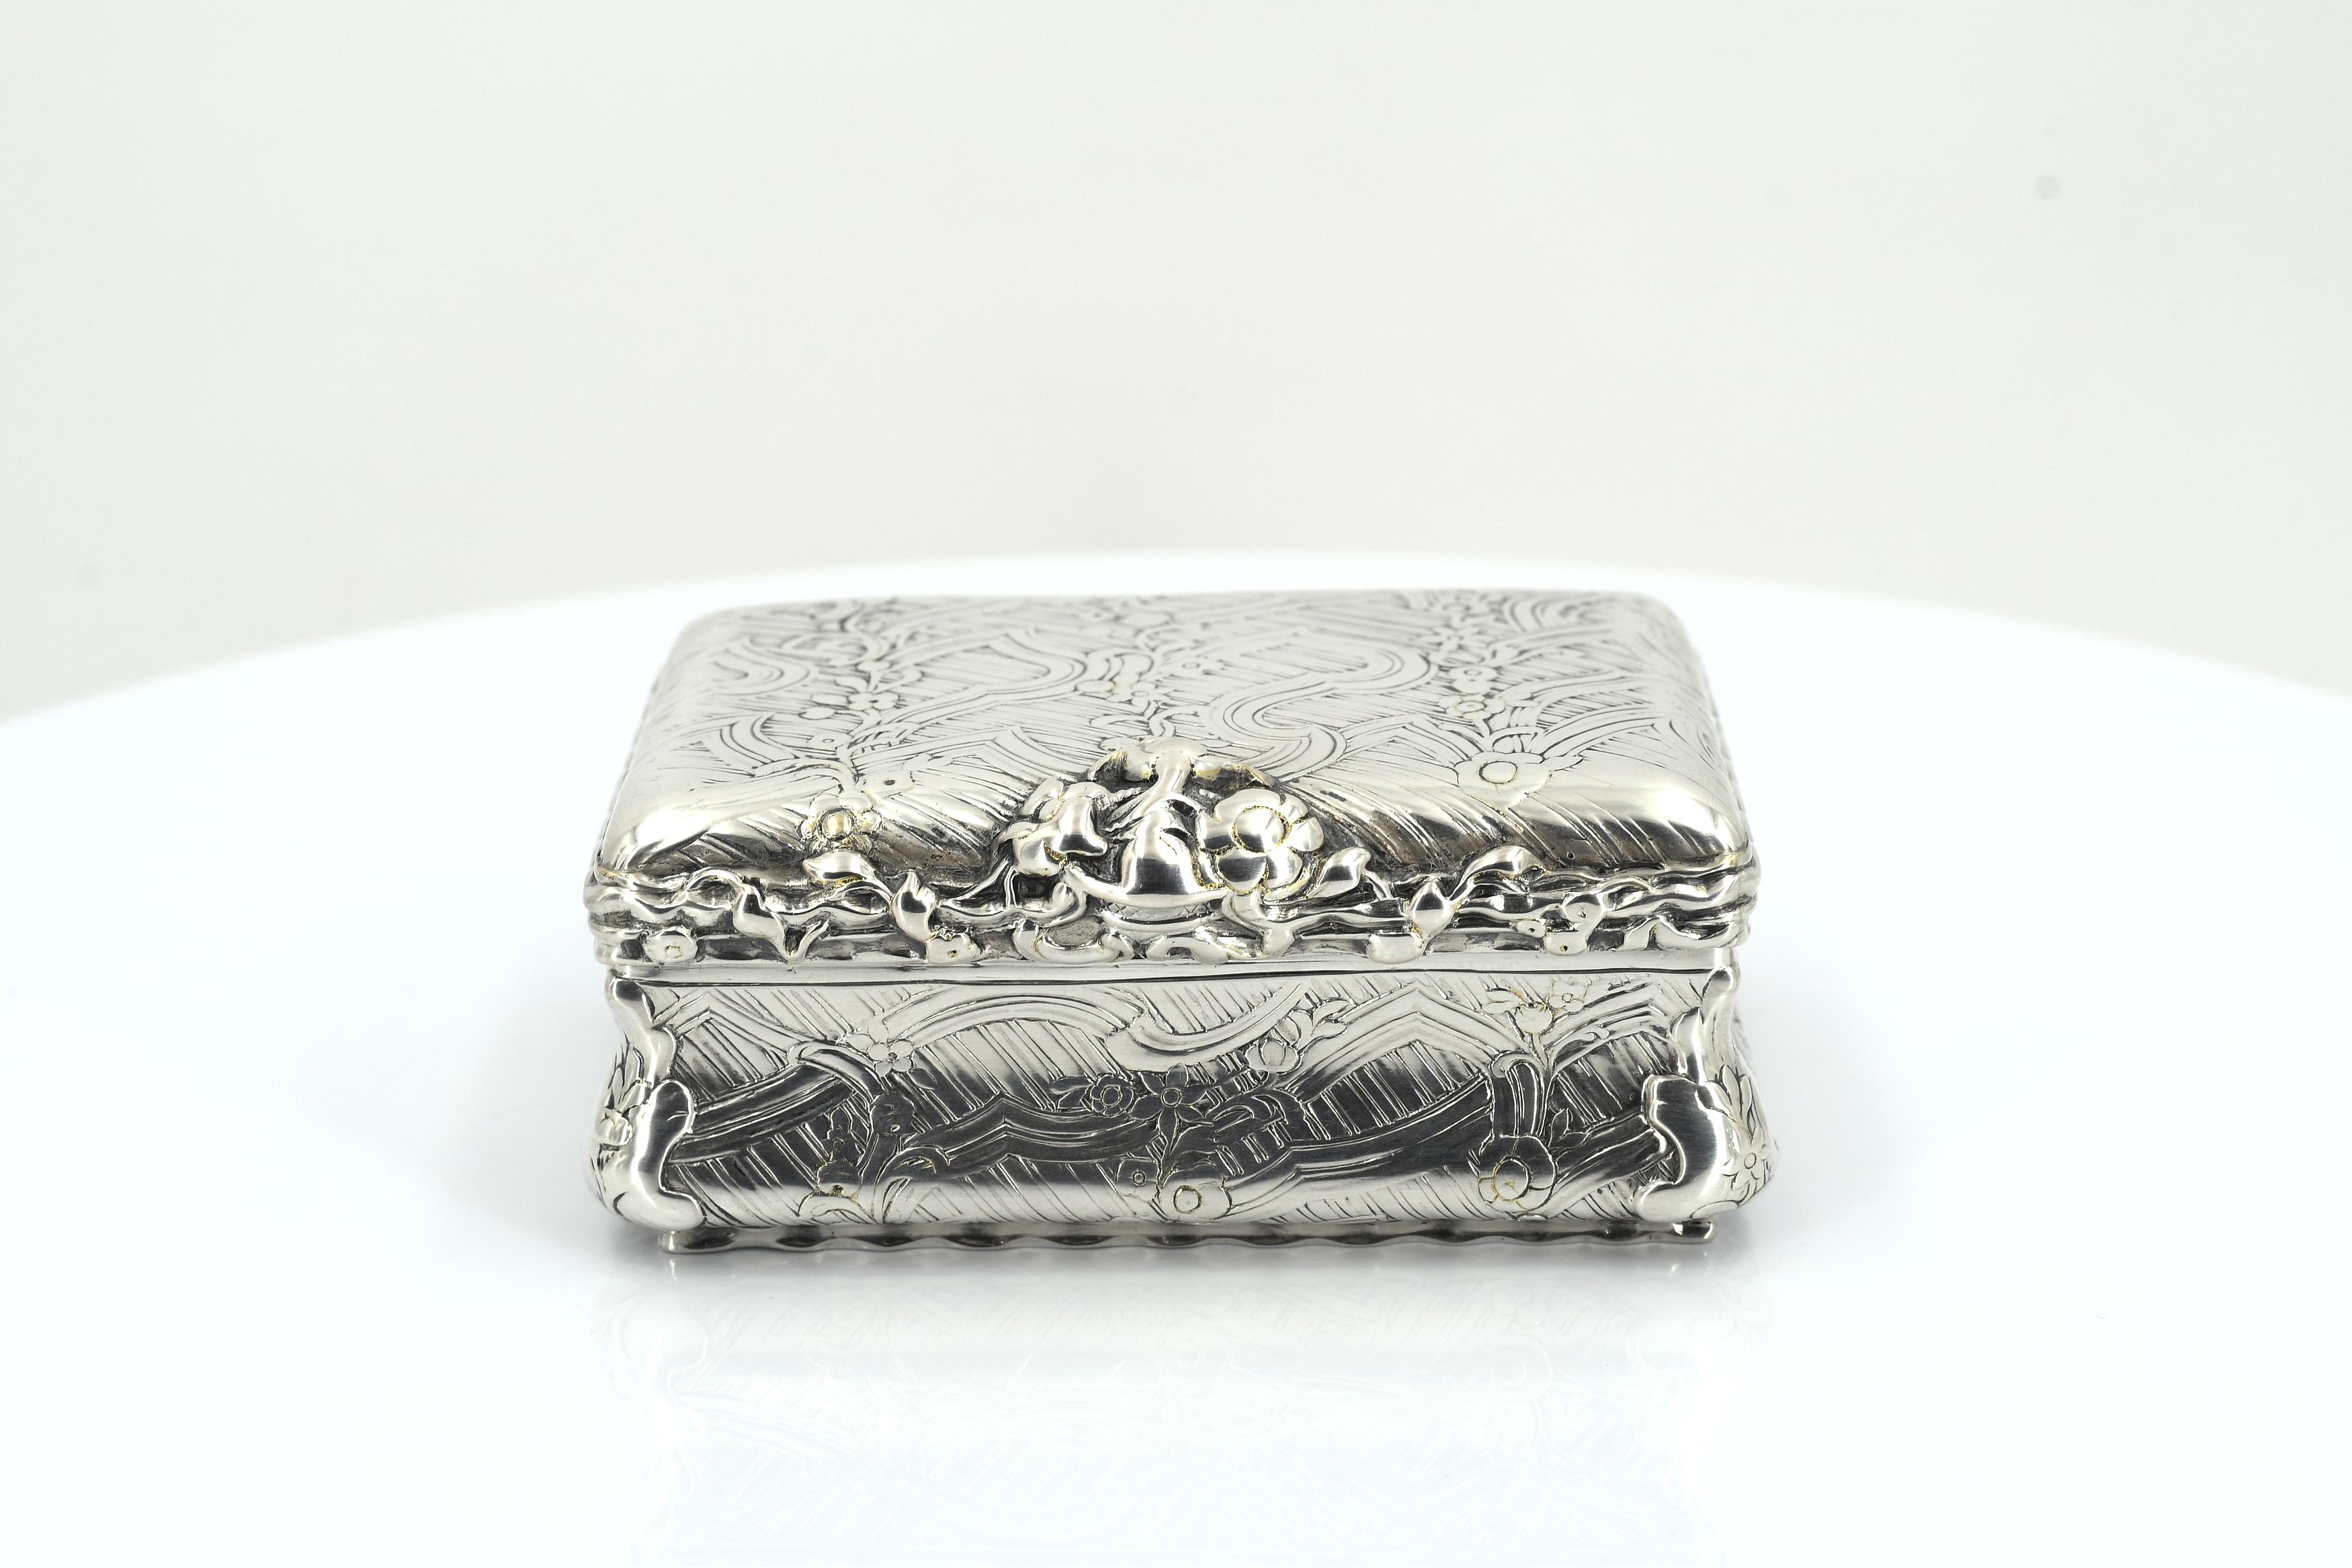 Silver snuffbox with flower tendrils - Image 2 of 9